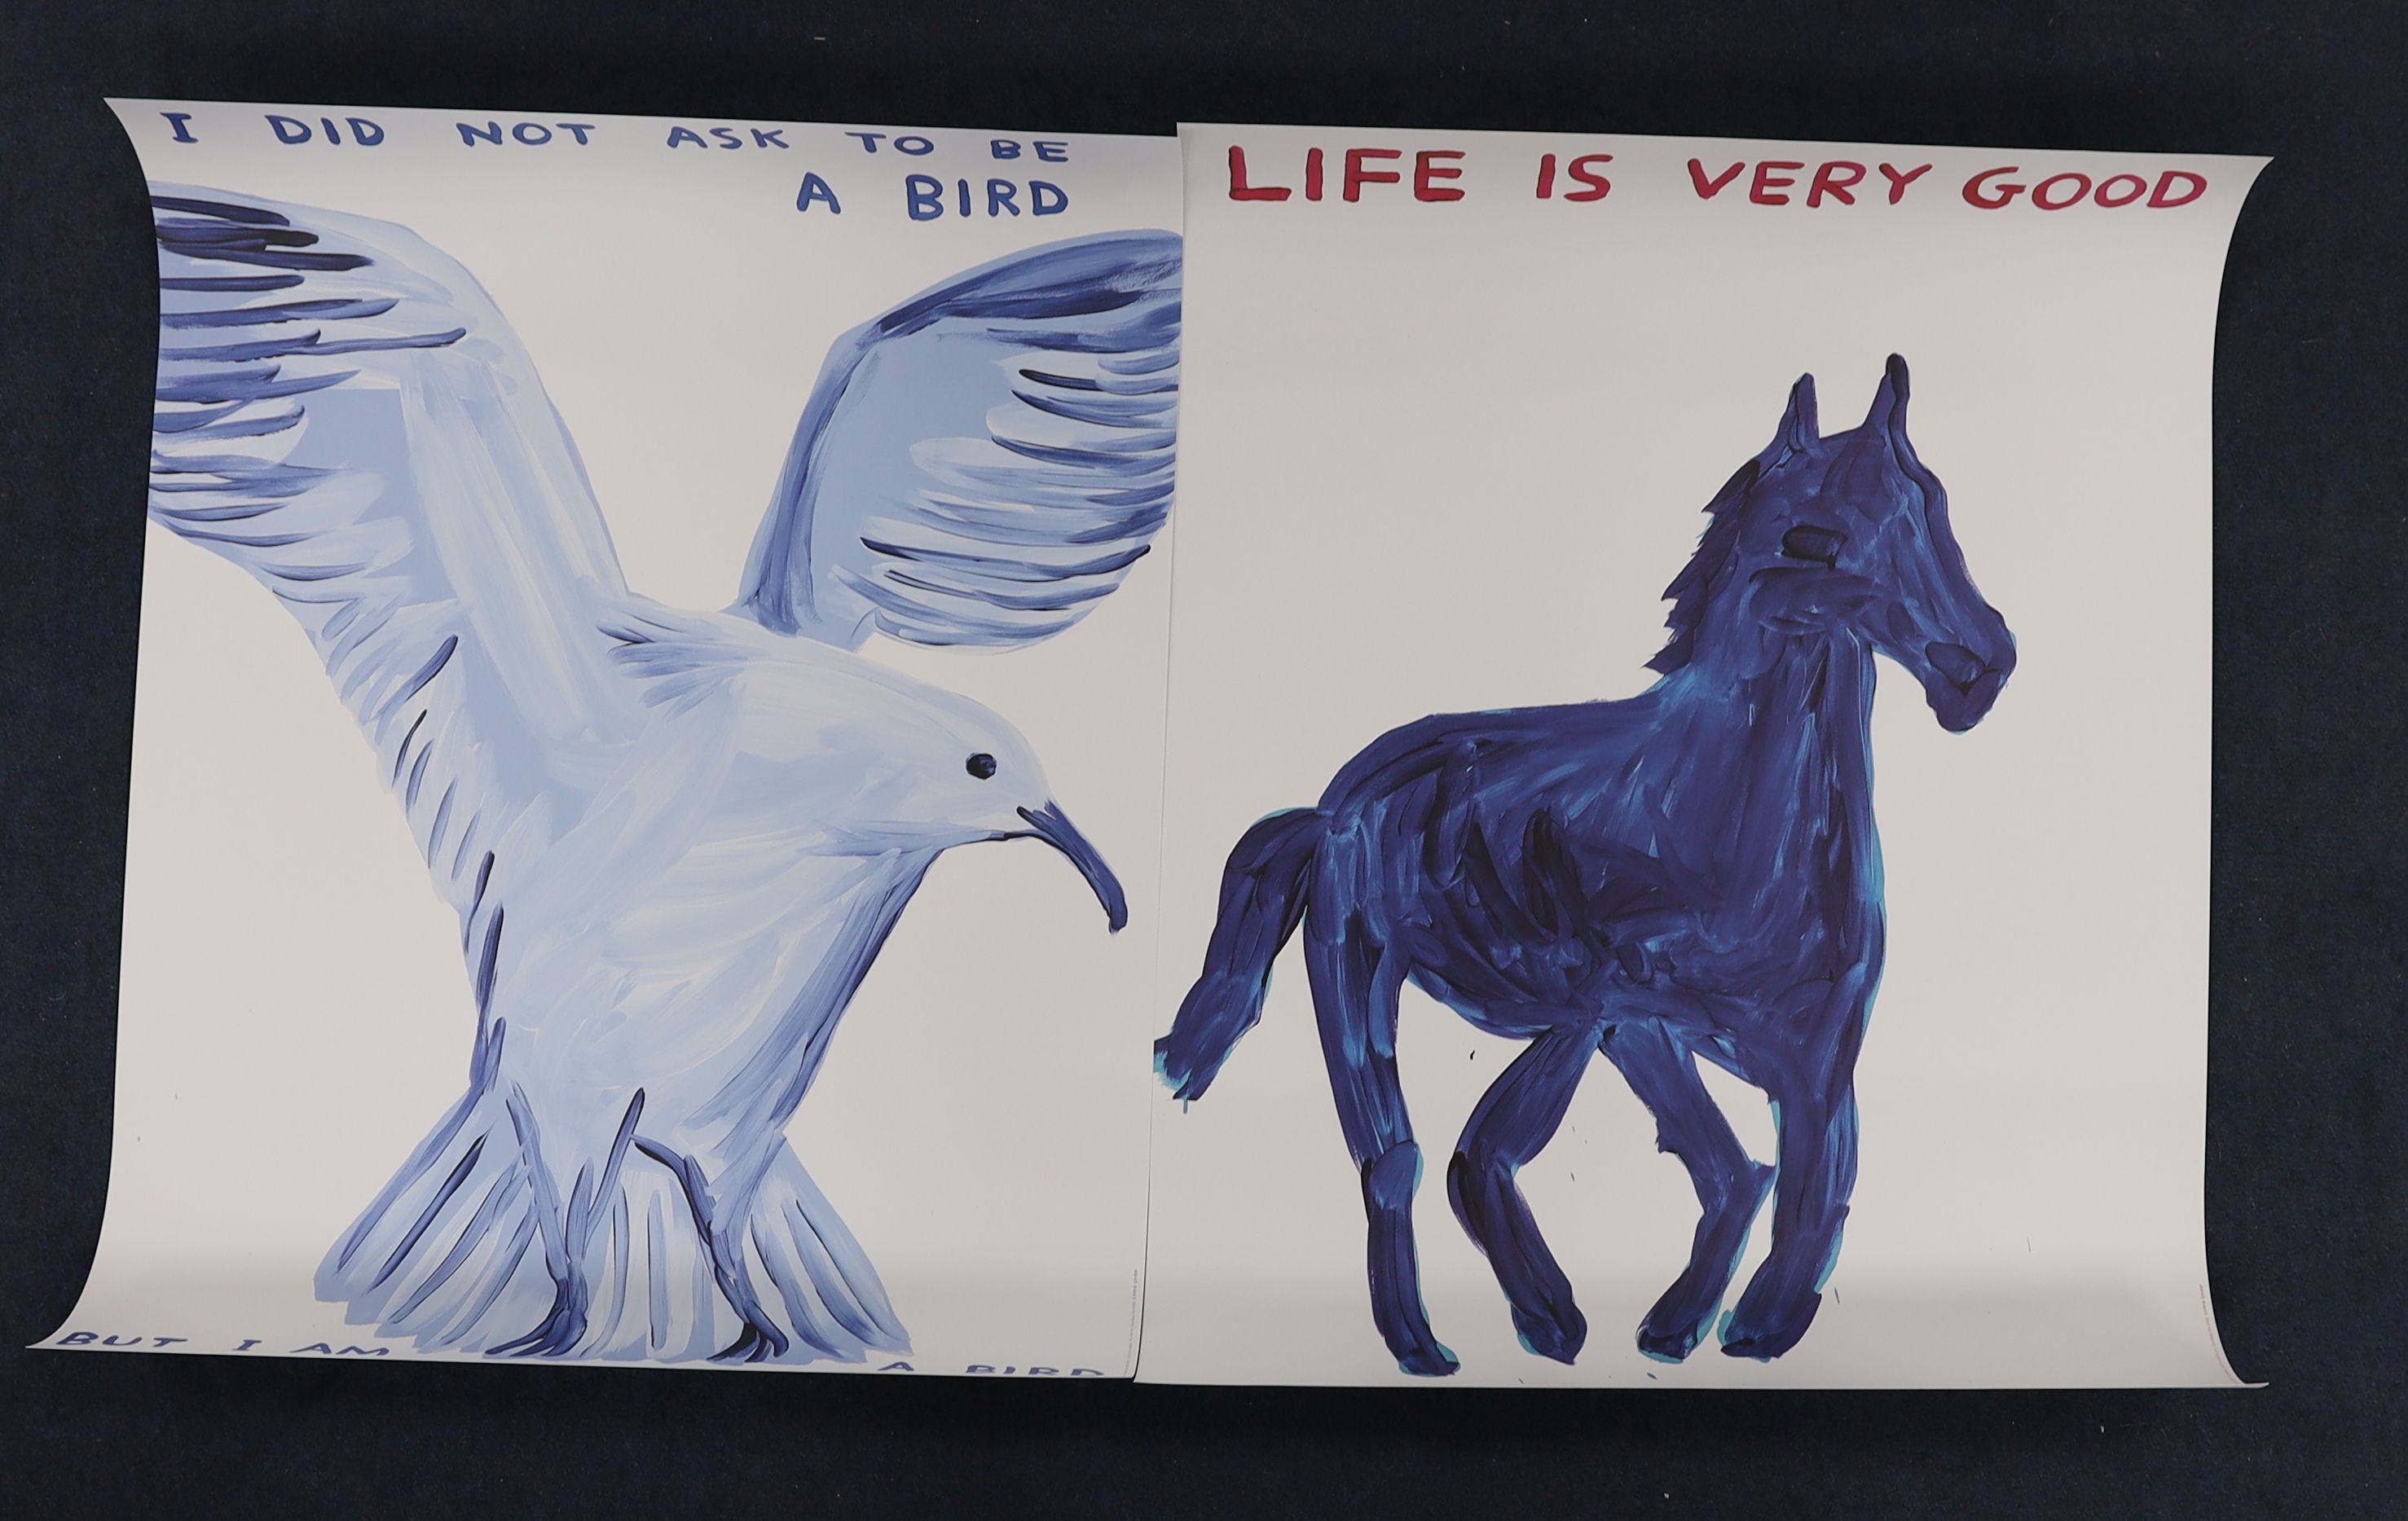 David Shrigley (1968-), two colour prints, 'Life is very good' and 'I did not ask to be a bird', 80 x 60cm, unframed